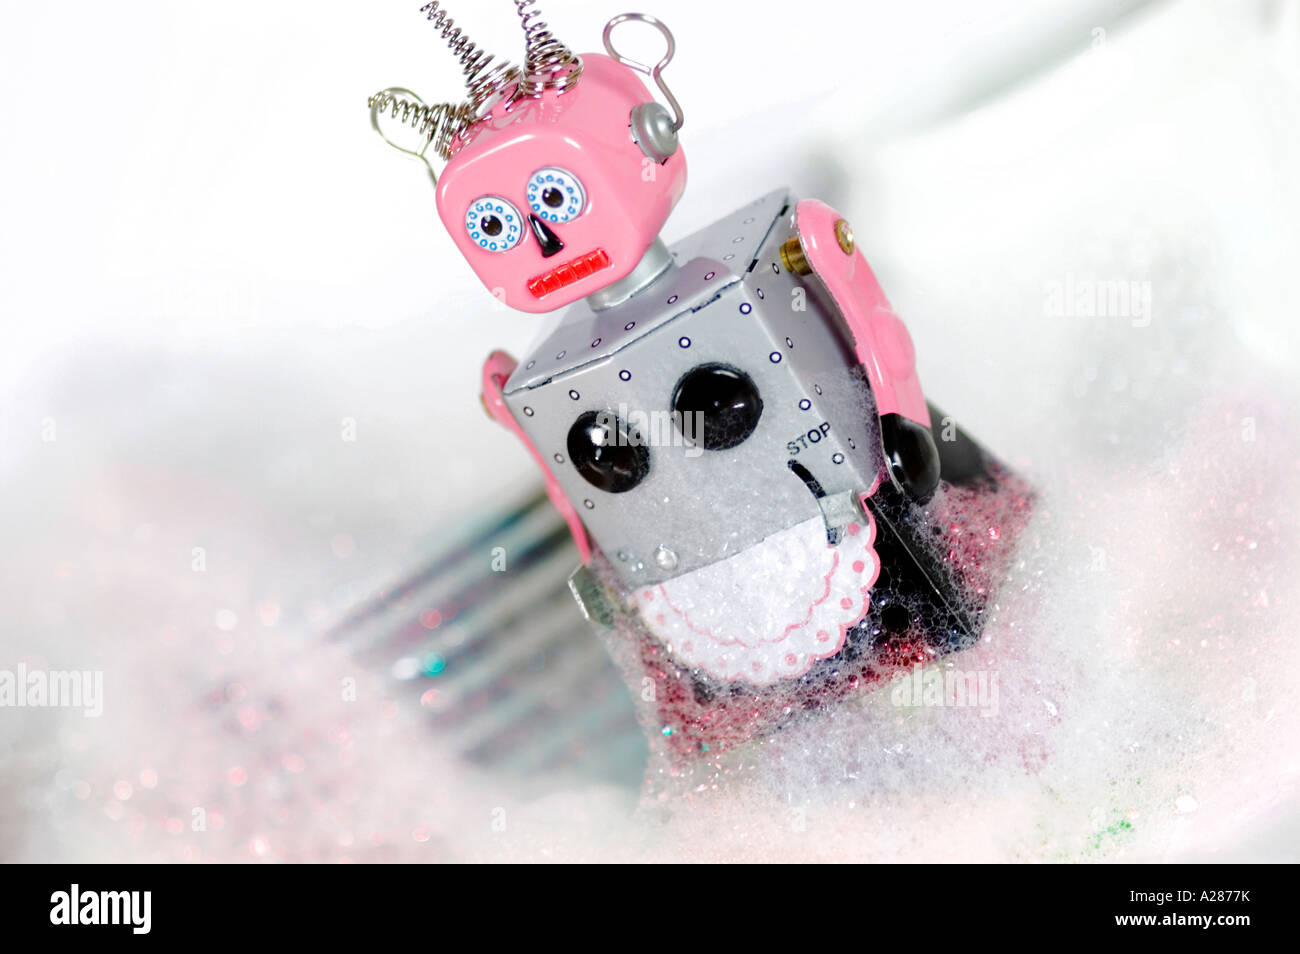 Female tin toy robot standing in front of dishes and covered in soap suds or washing up liquid bubbles Stock Photo